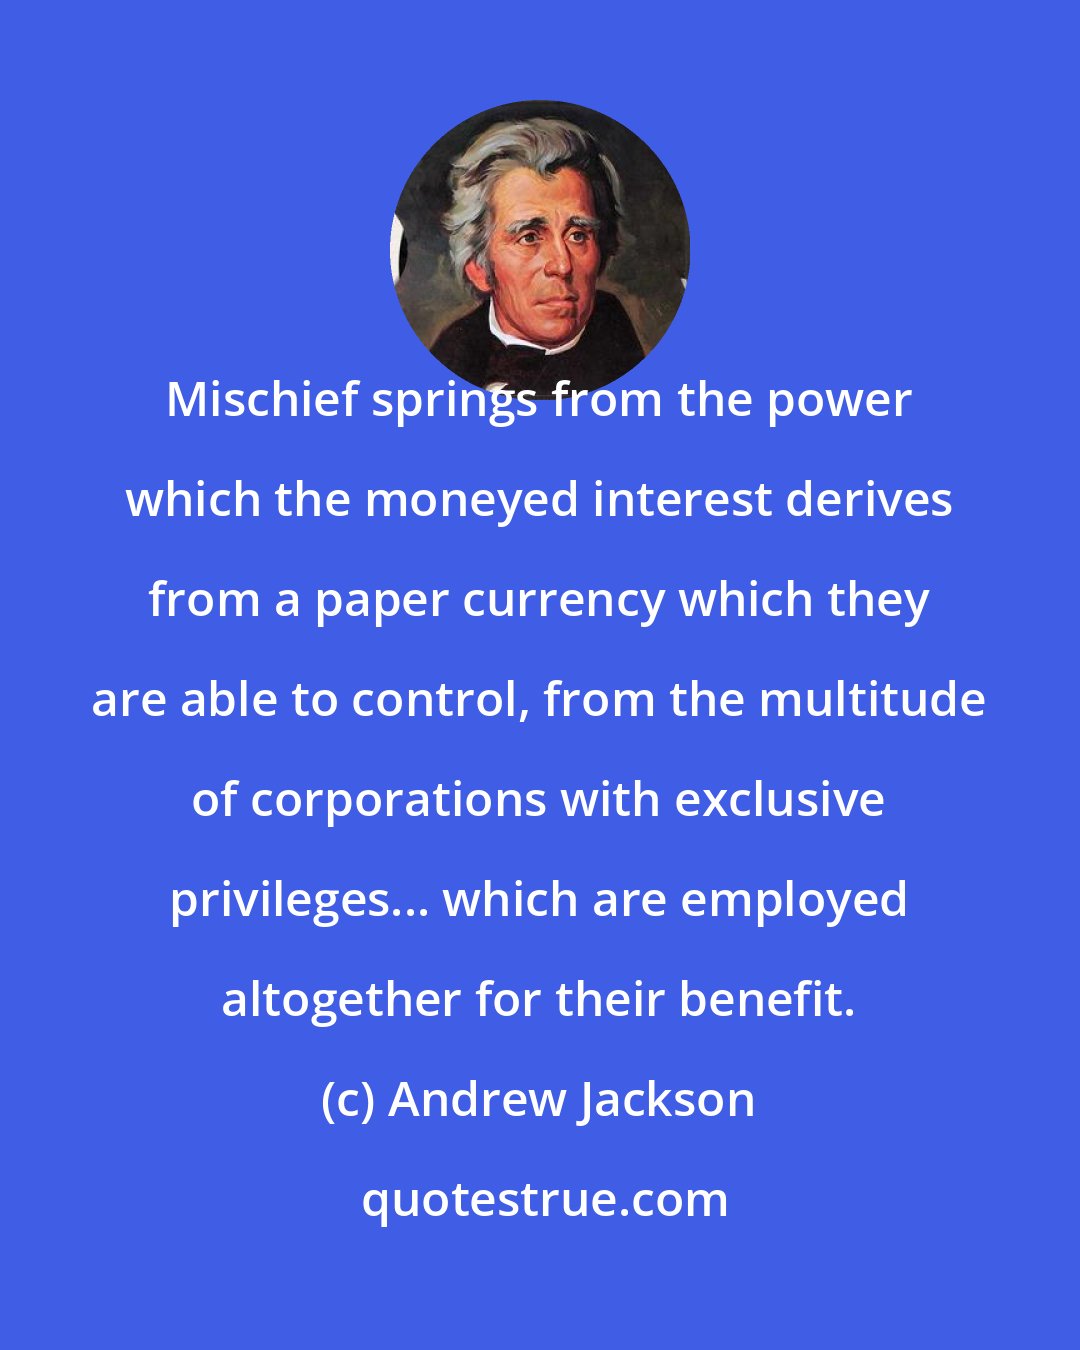 Andrew Jackson: Mischief springs from the power which the moneyed interest derives from a paper currency which they are able to control, from the multitude of corporations with exclusive privileges... which are employed altogether for their benefit.